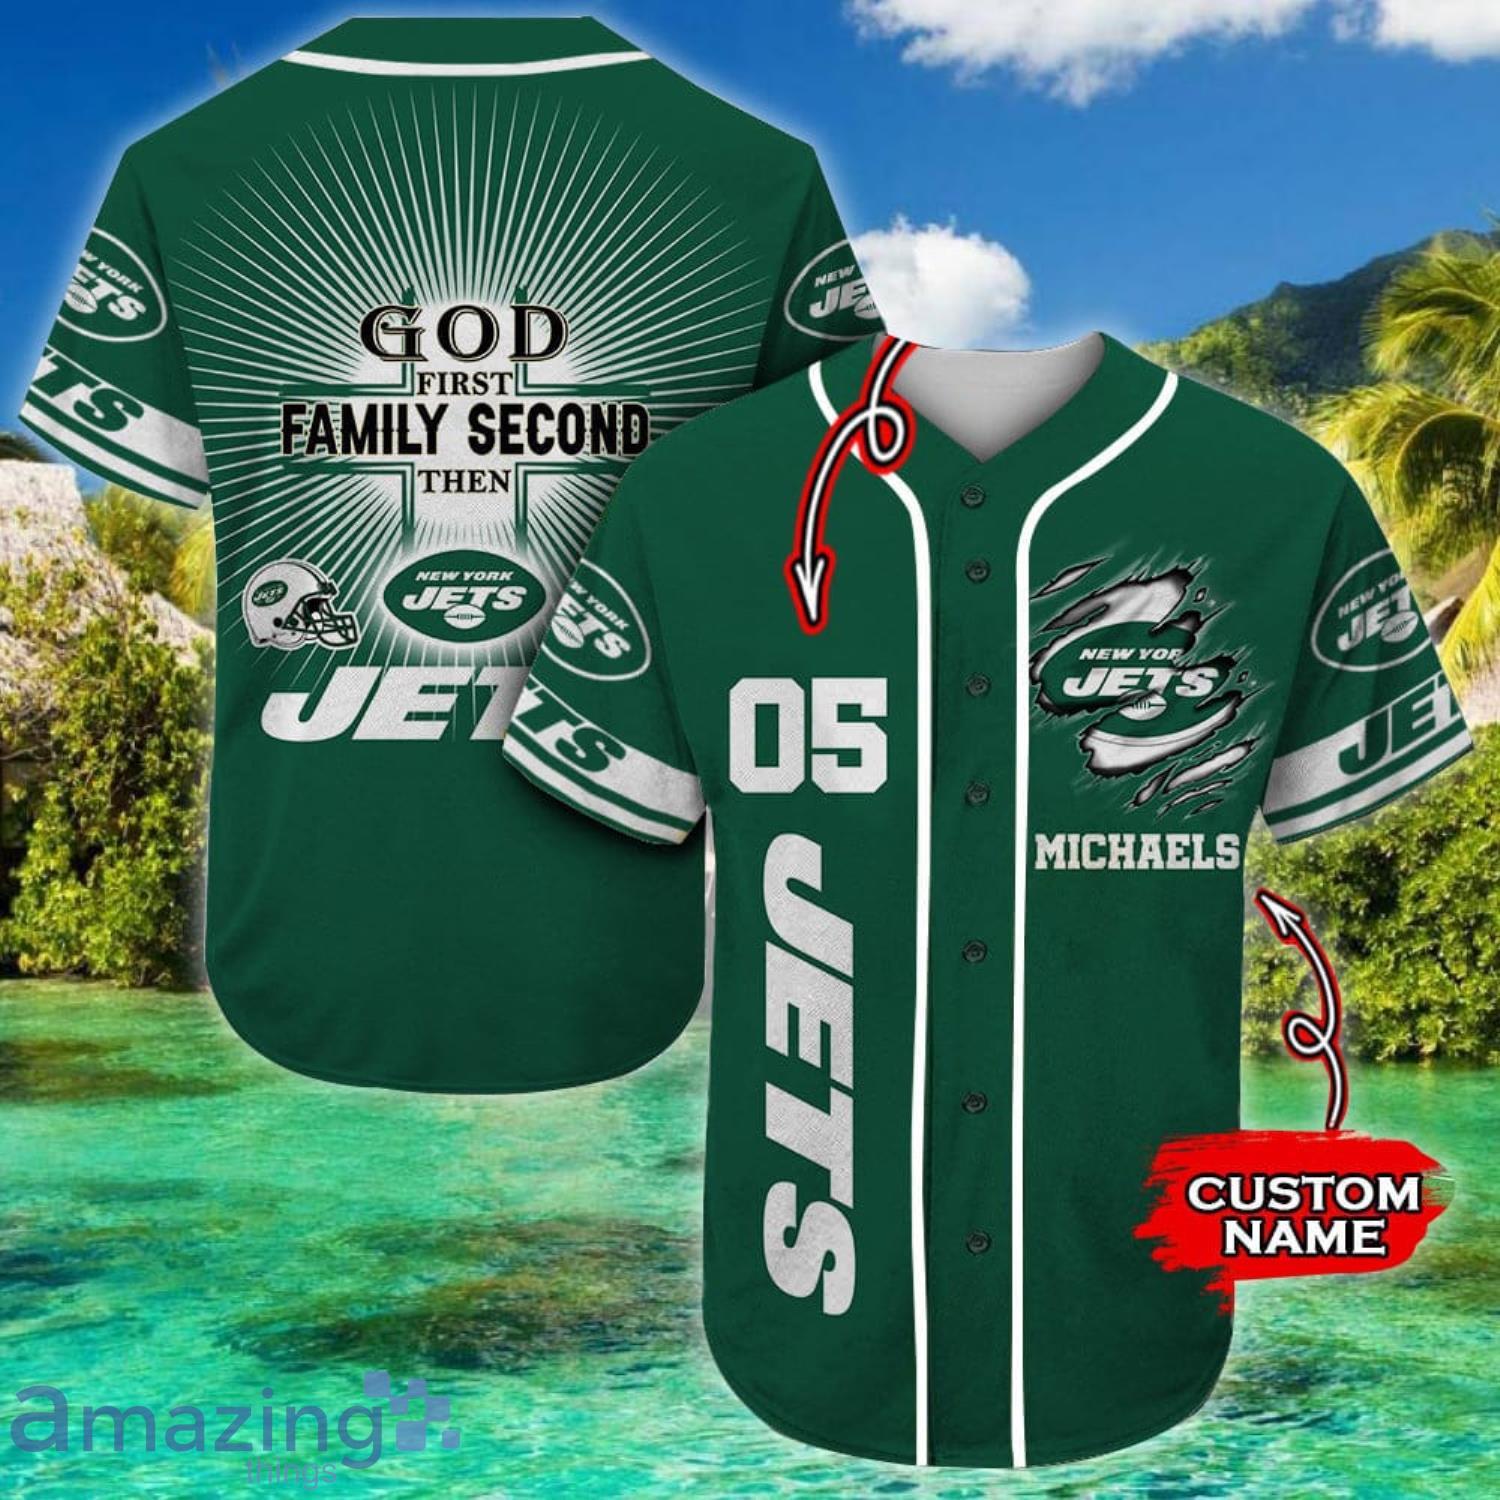 New York Jets NFL Personalized God First Family Second Baseball